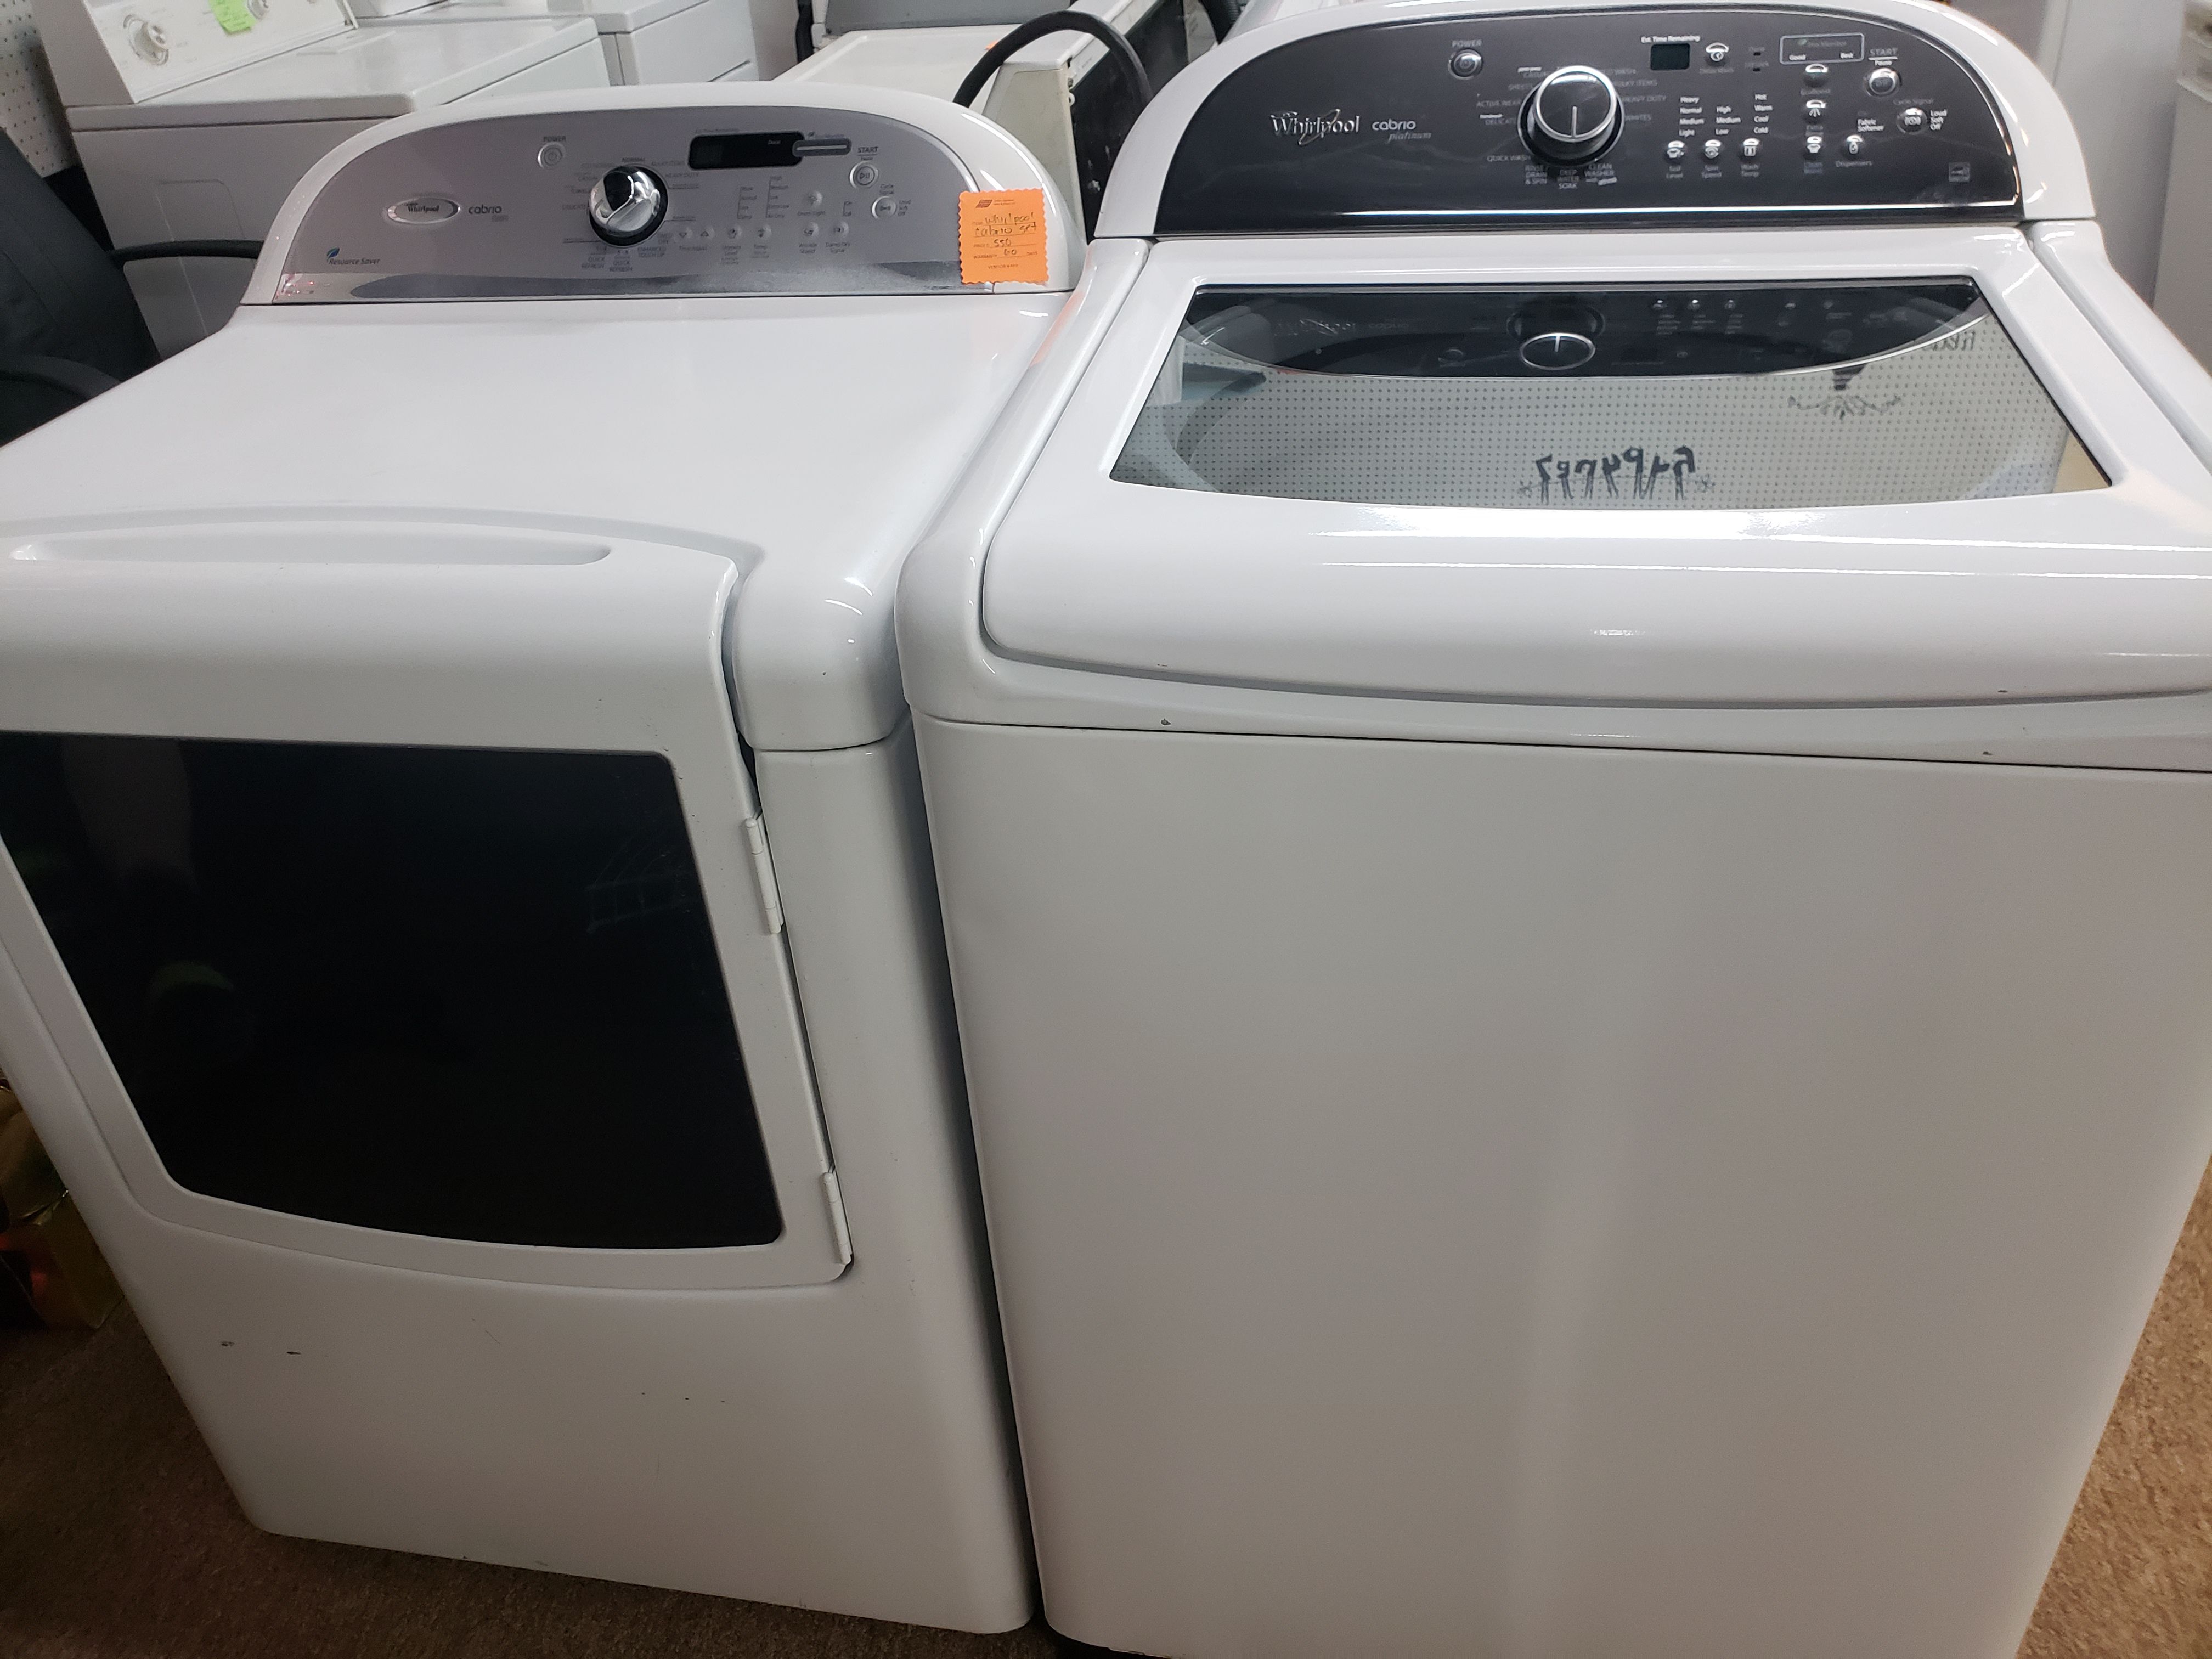 Whirlpool Cabrio washer and dryer set. Warranty and Delivery